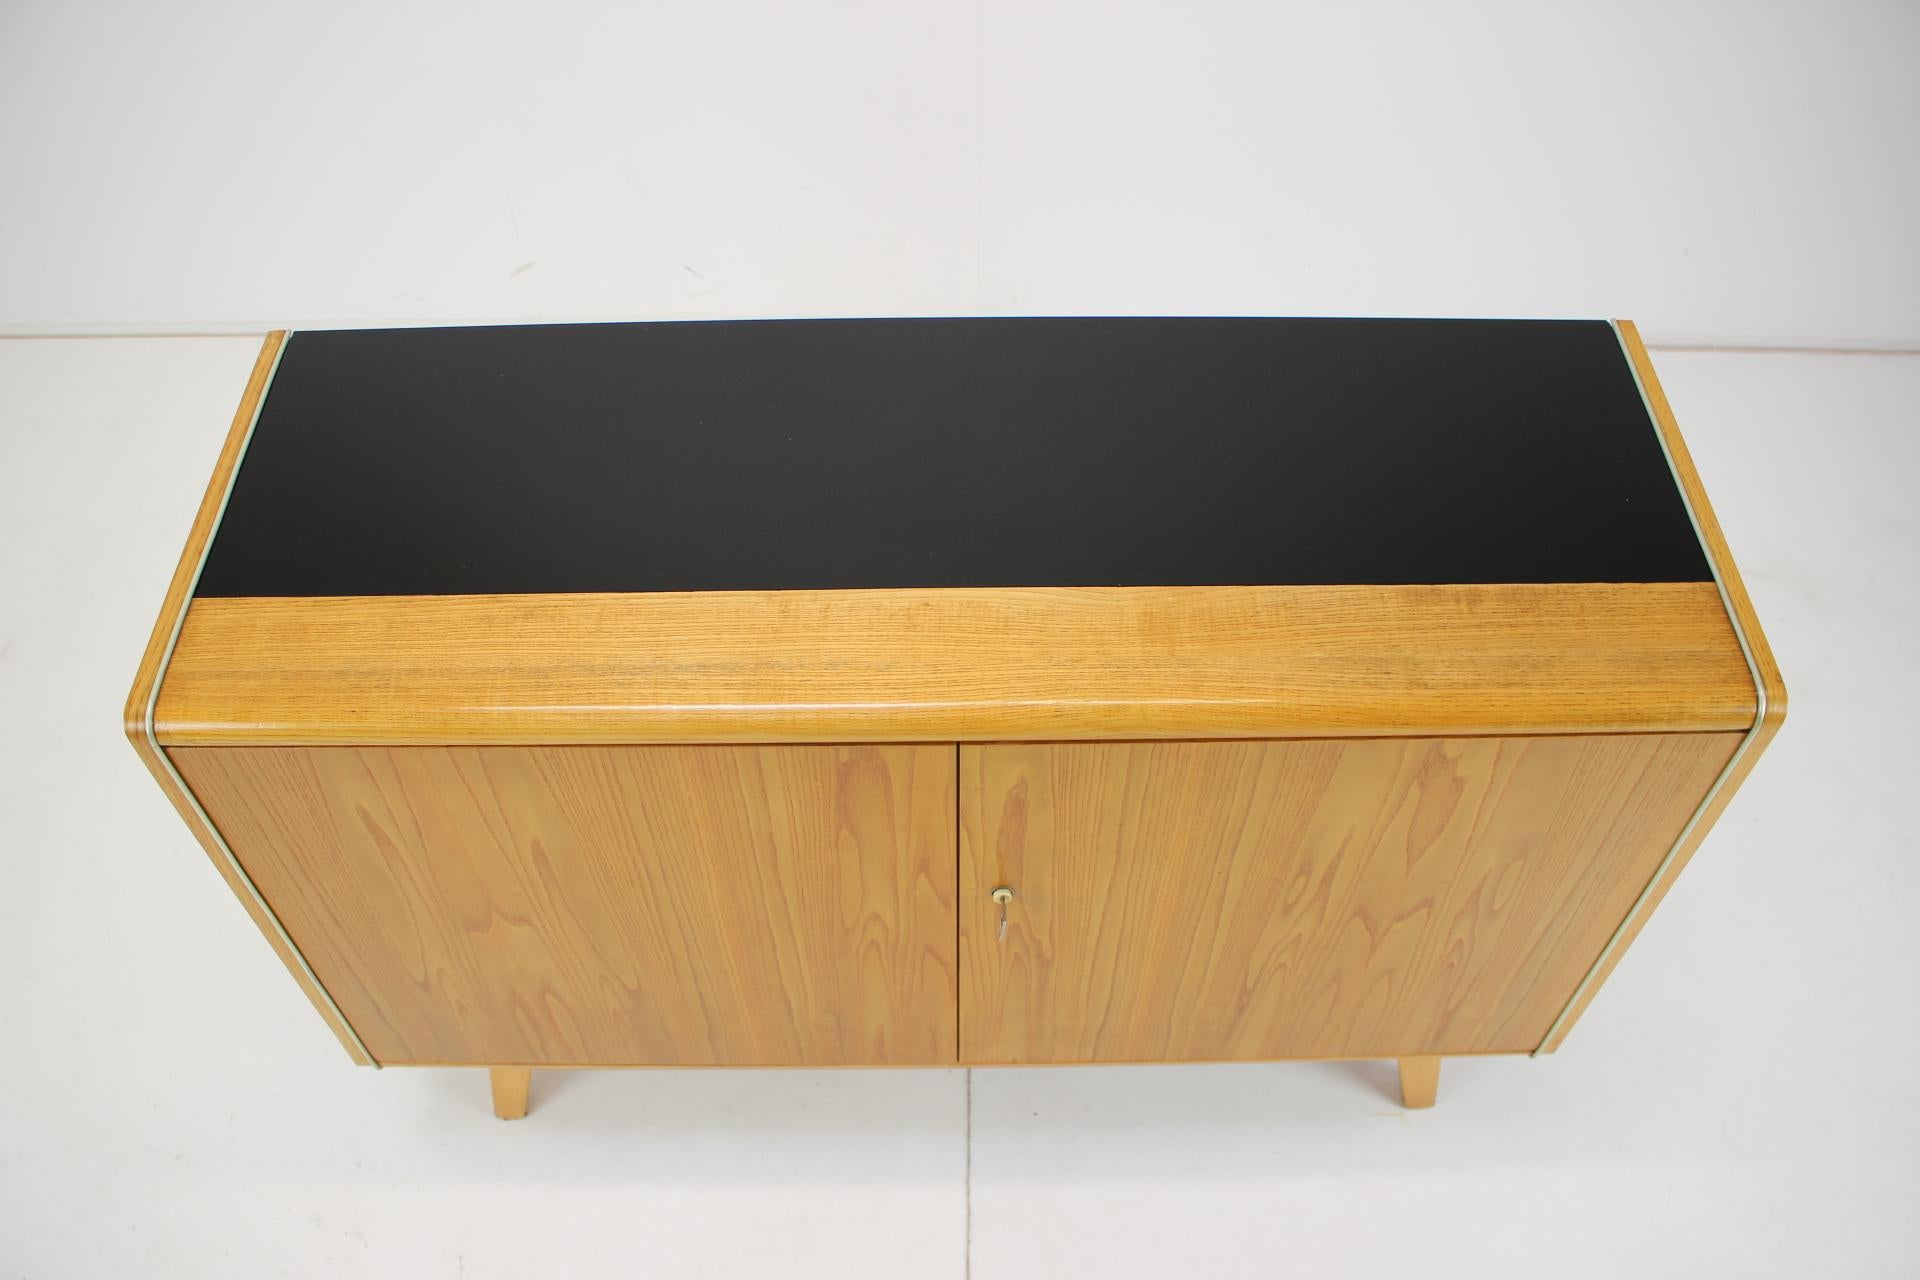 This mid century sideboard was designed by Hubert Nepožitek & Bohumil Landsman for Jitona company in the 1960´s. Material: Veneer wood, opaxite glass.
The glass has scratches on the surface.